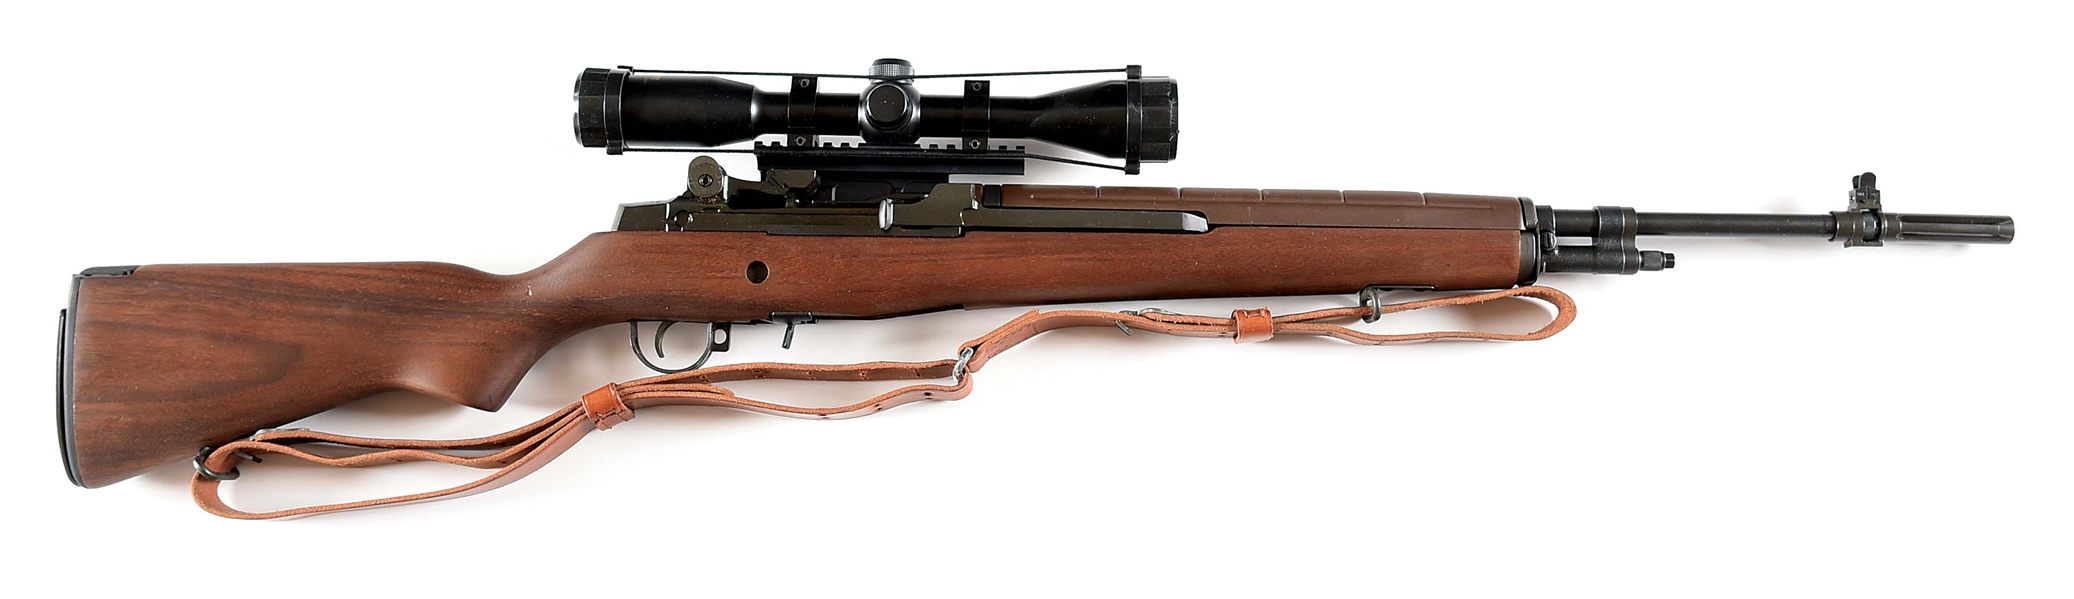 (M) SPRINGFIELD M1A SEMI-AUTOMATIC RIFLE WITH FACTORY BOX. 